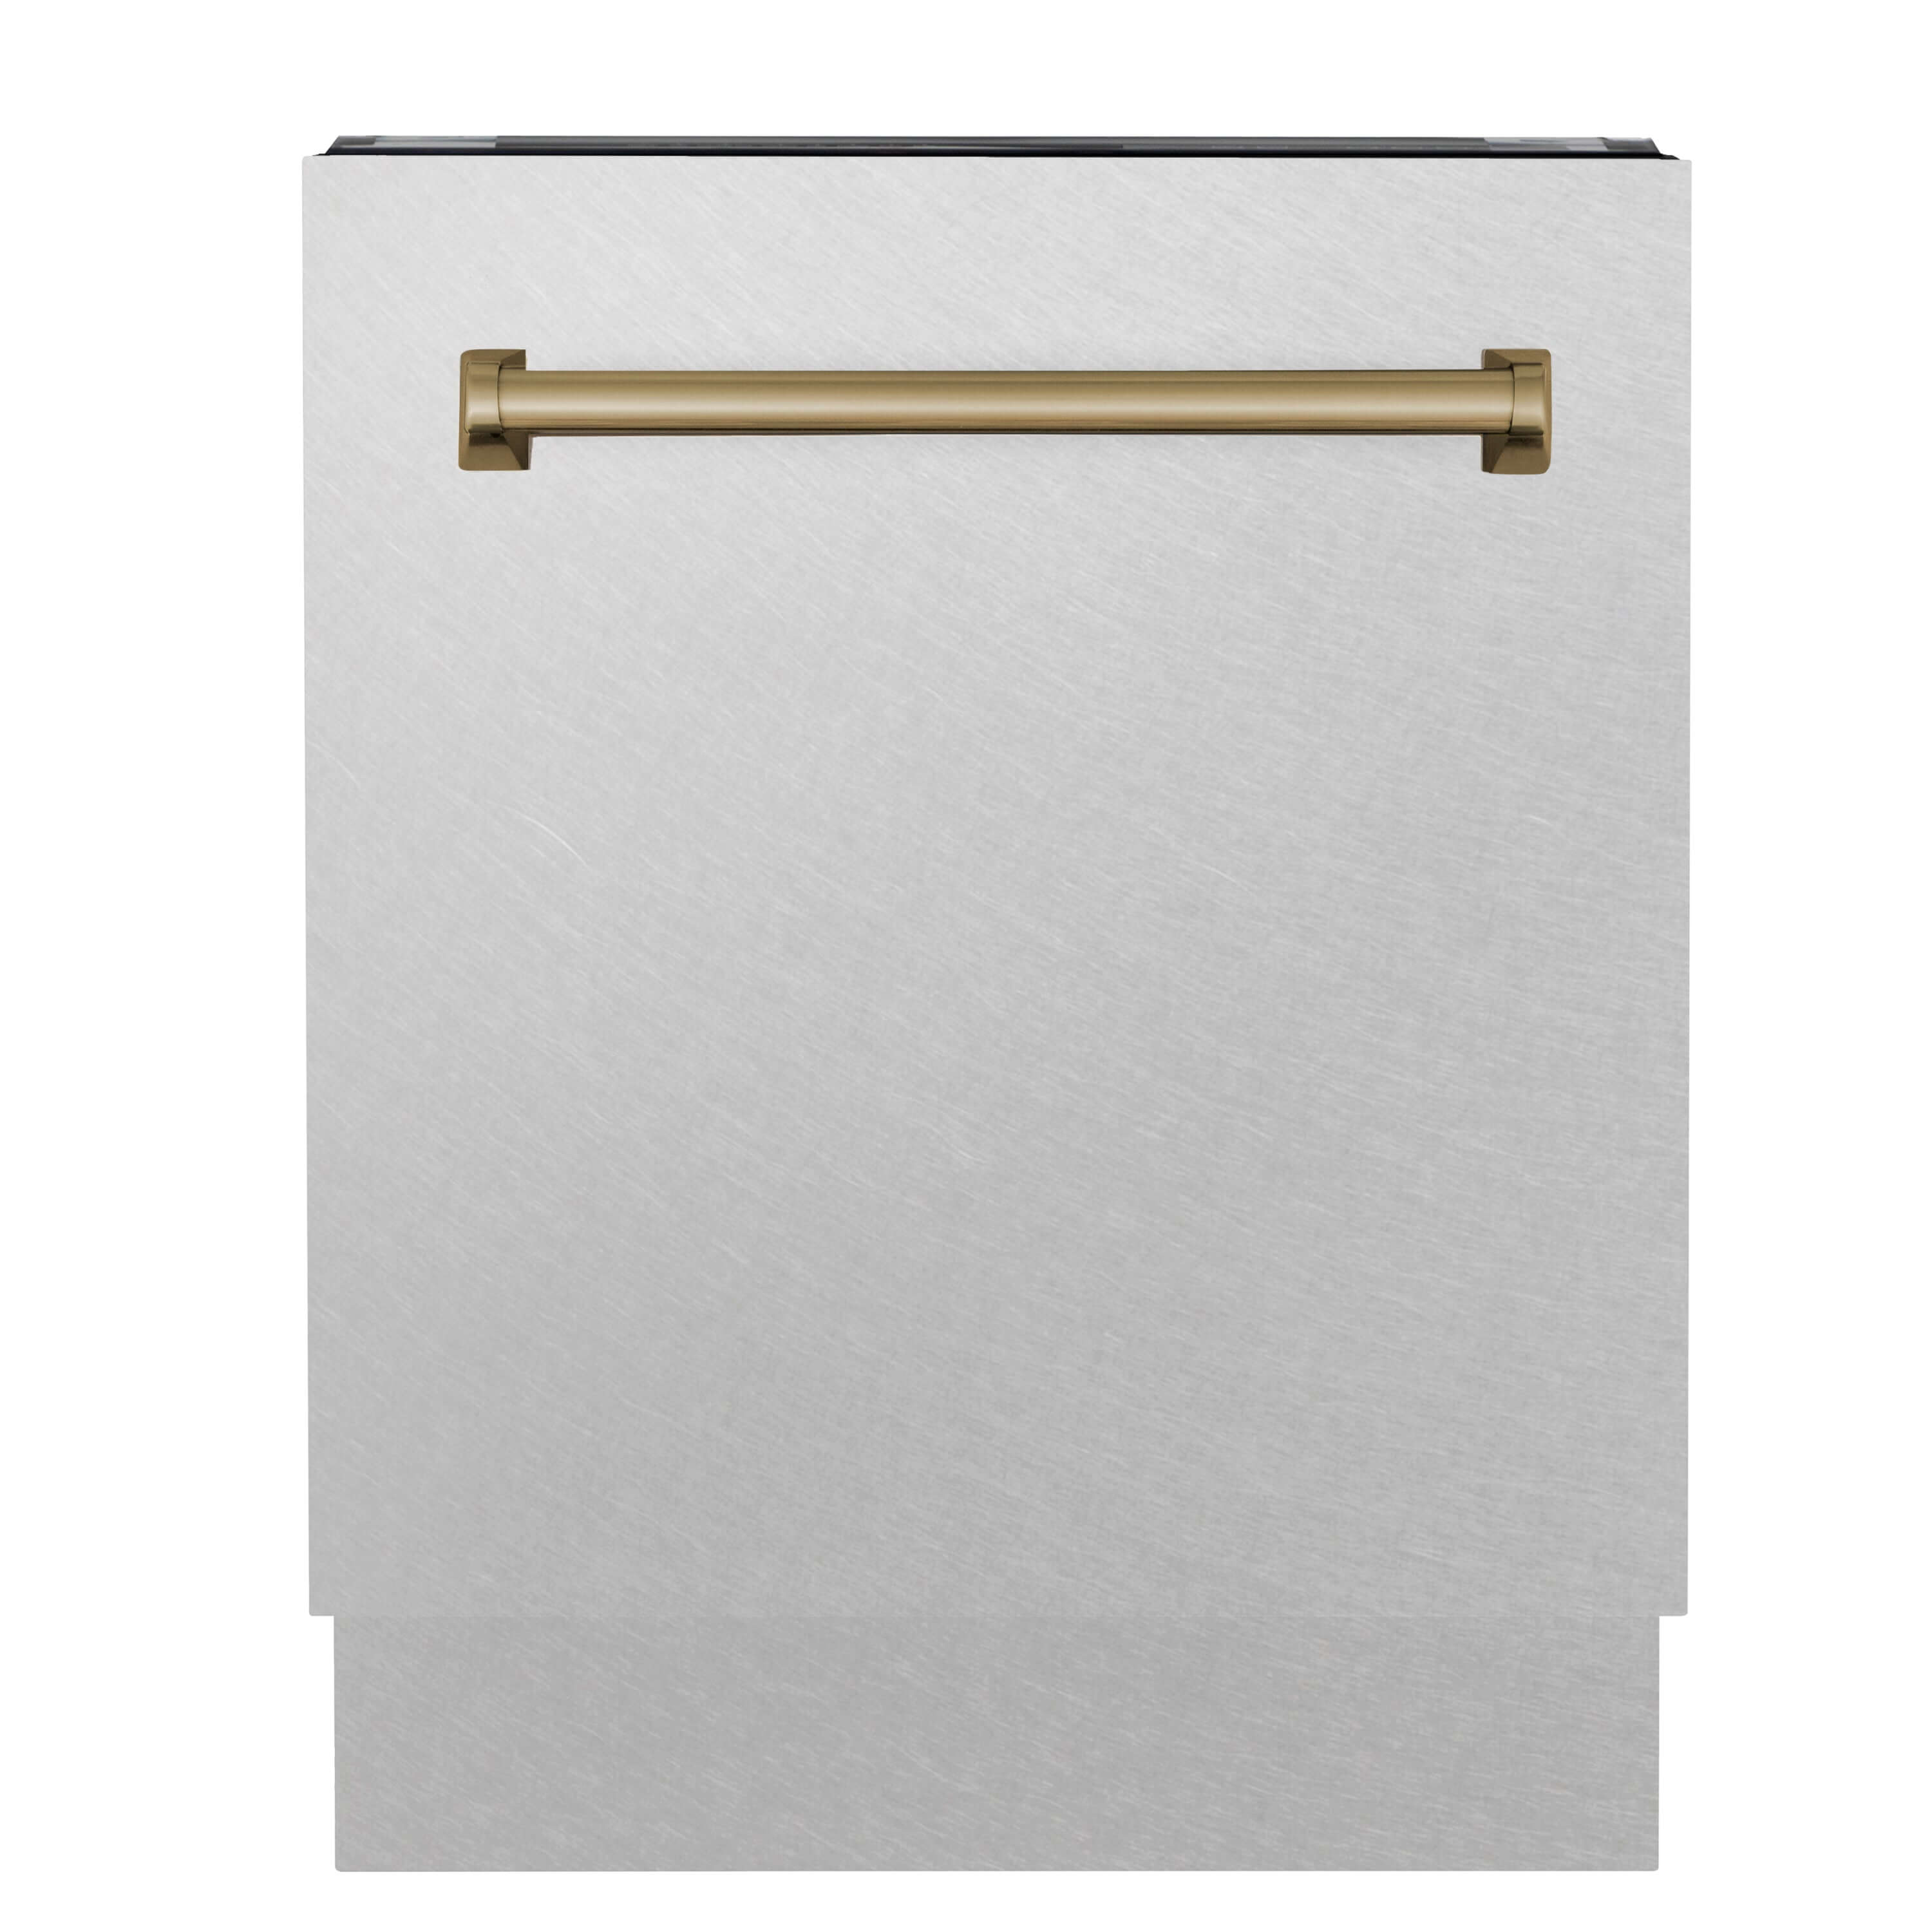 ZLINE Autograph Edition 24 in. Tallac Series 3rd Rack Top Control Built-In Tall Tub Dishwasher in Fingerprint Resistant Stainless Steel with Champagne Bronze Handle, 51dBa (DWVZ-SN-24-CB) front, closed.